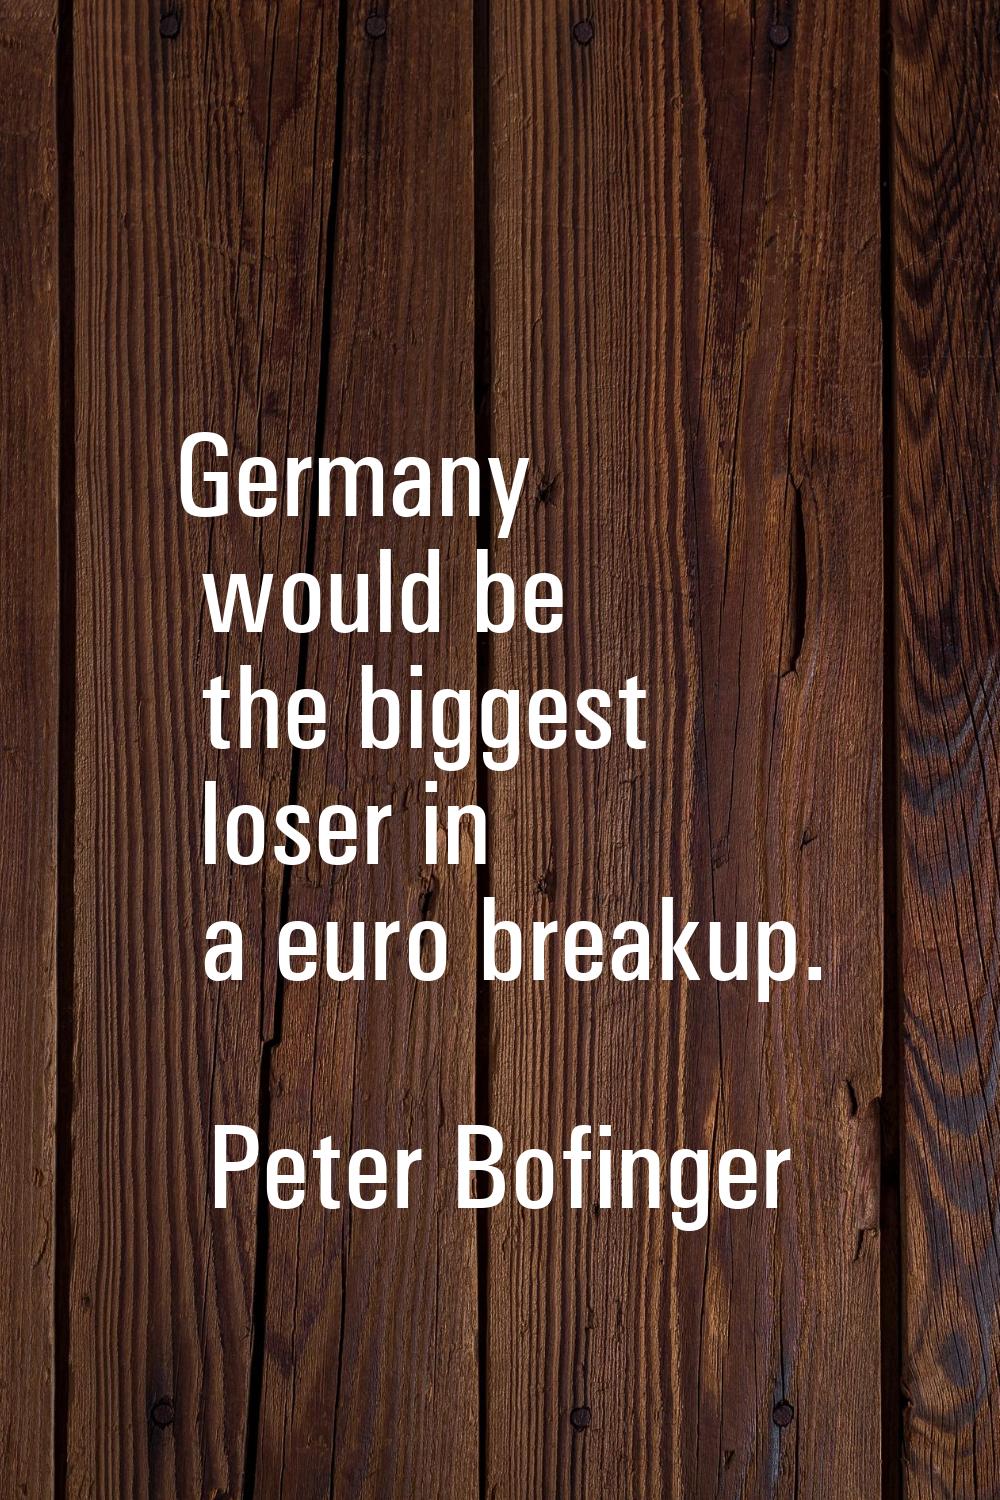 Germany would be the biggest loser in a euro breakup.